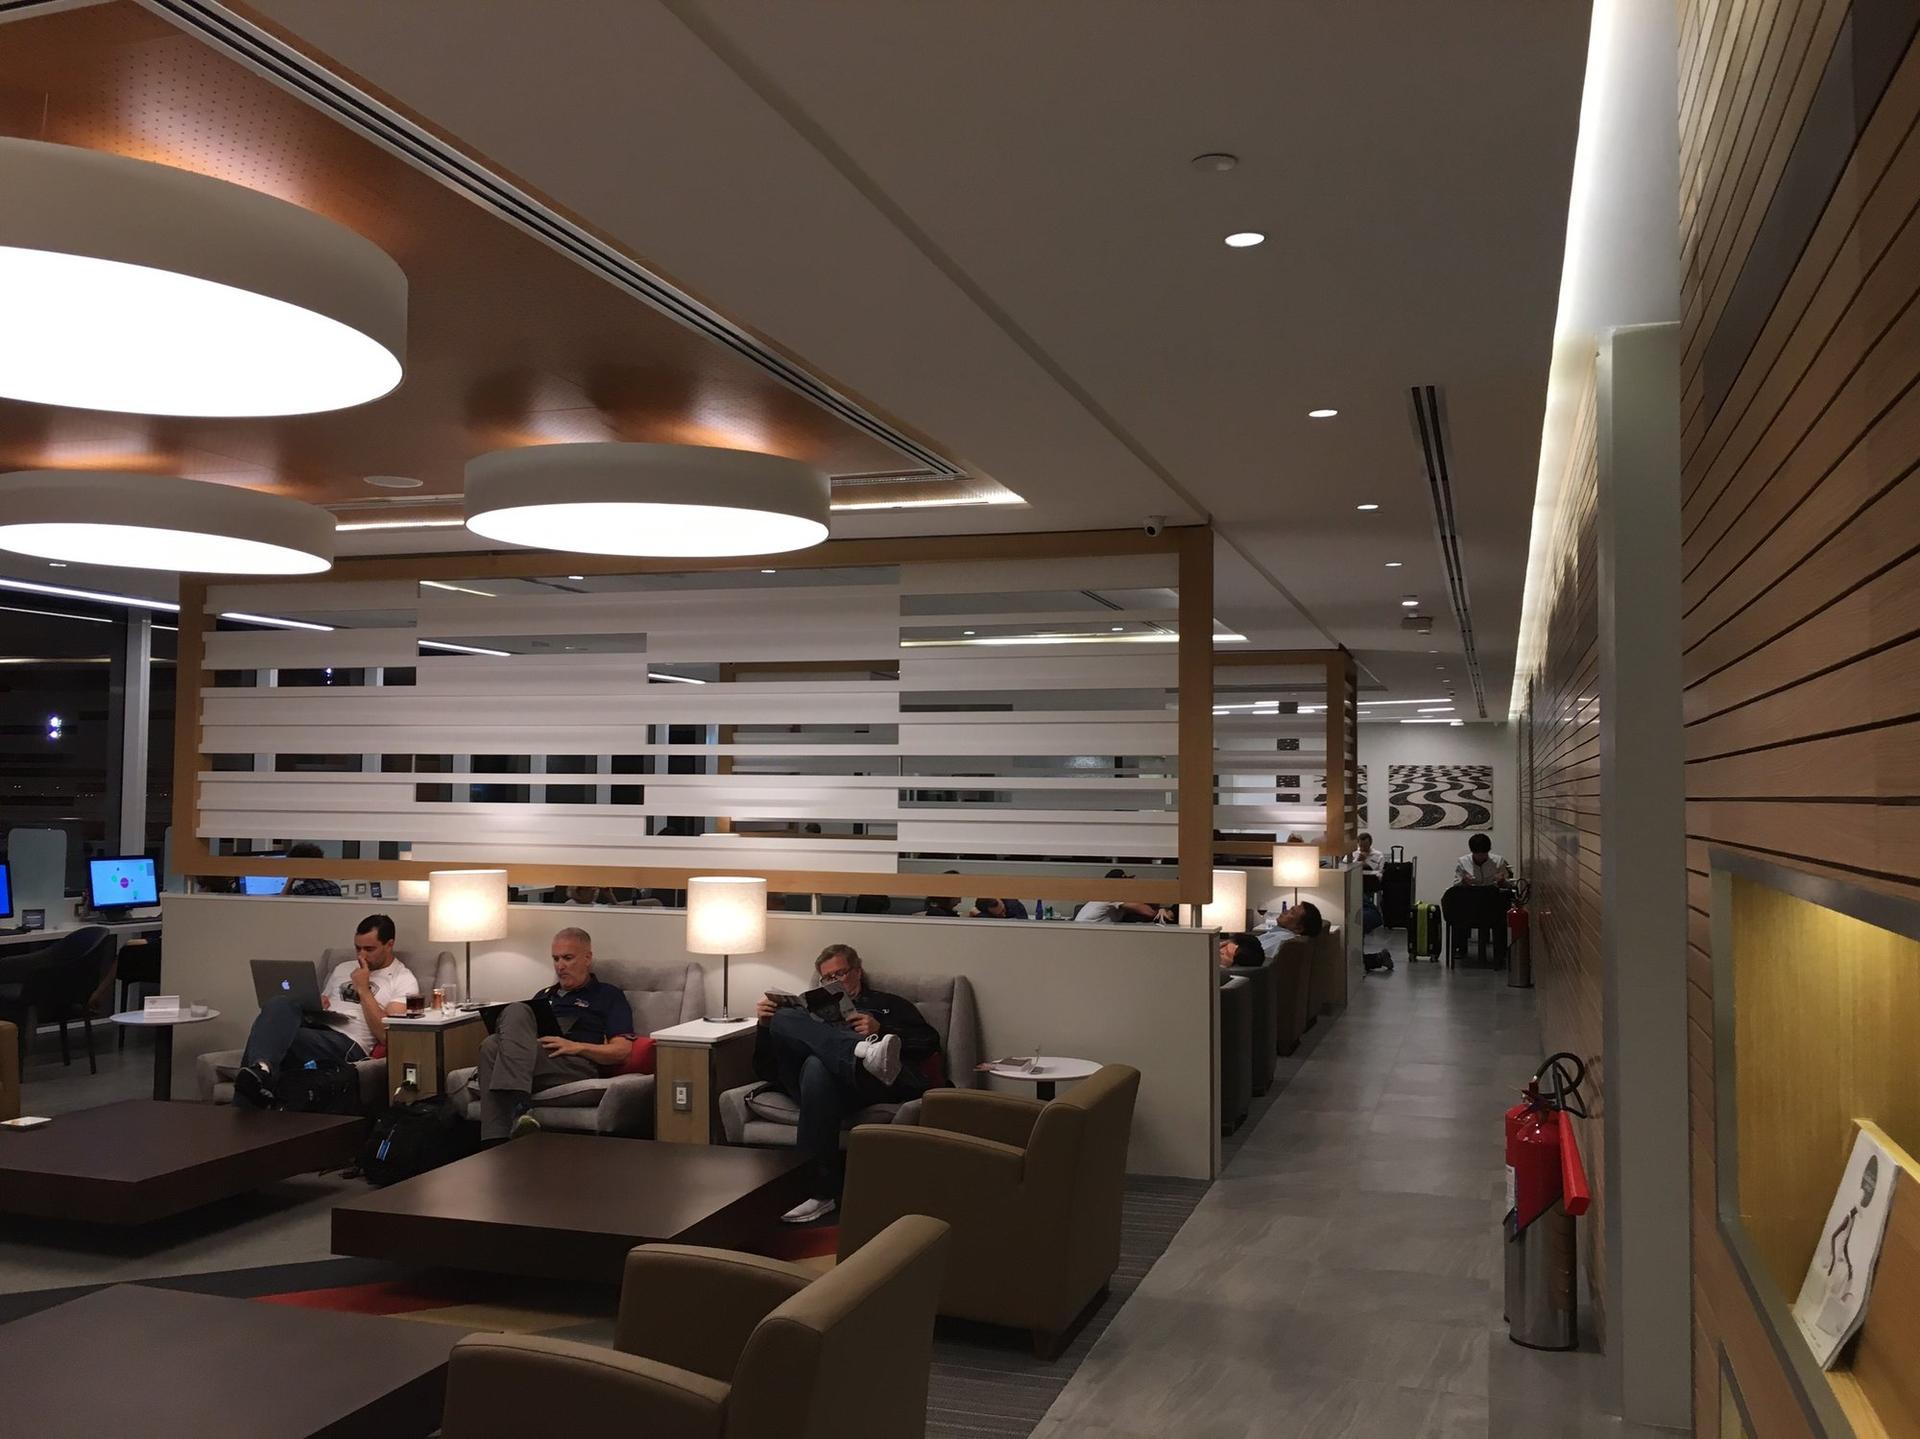 American Airlines Admirals Club image 3 of 6